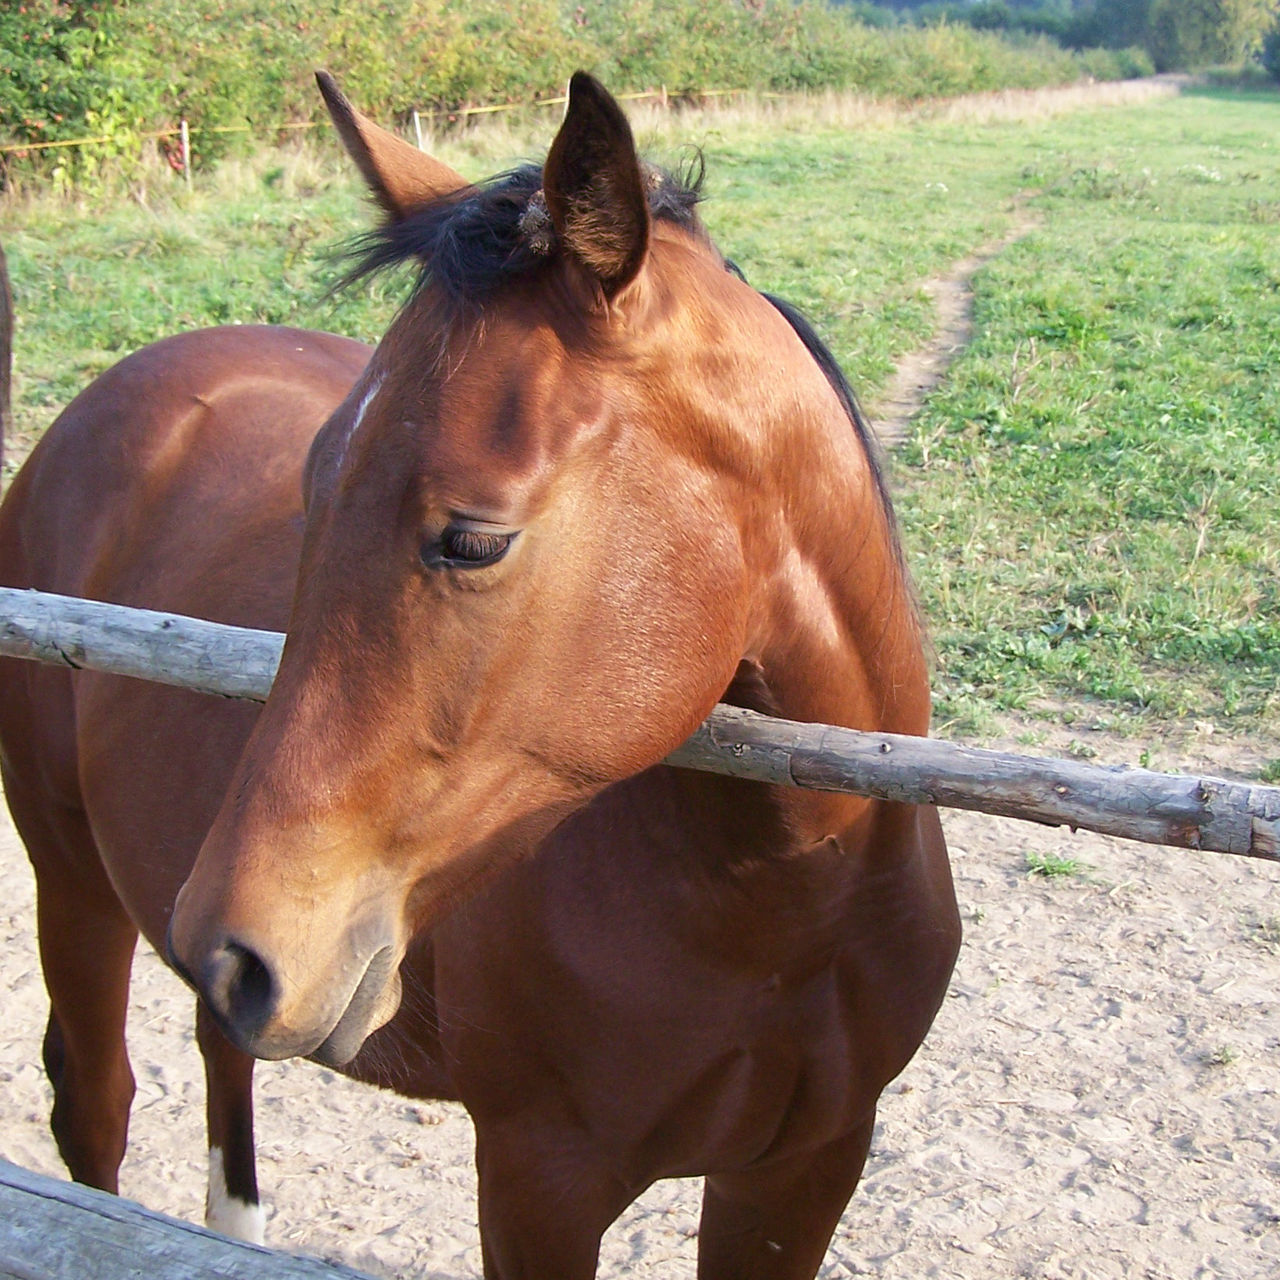 CLOSE-UP OF HORSE STANDING IN FIELD